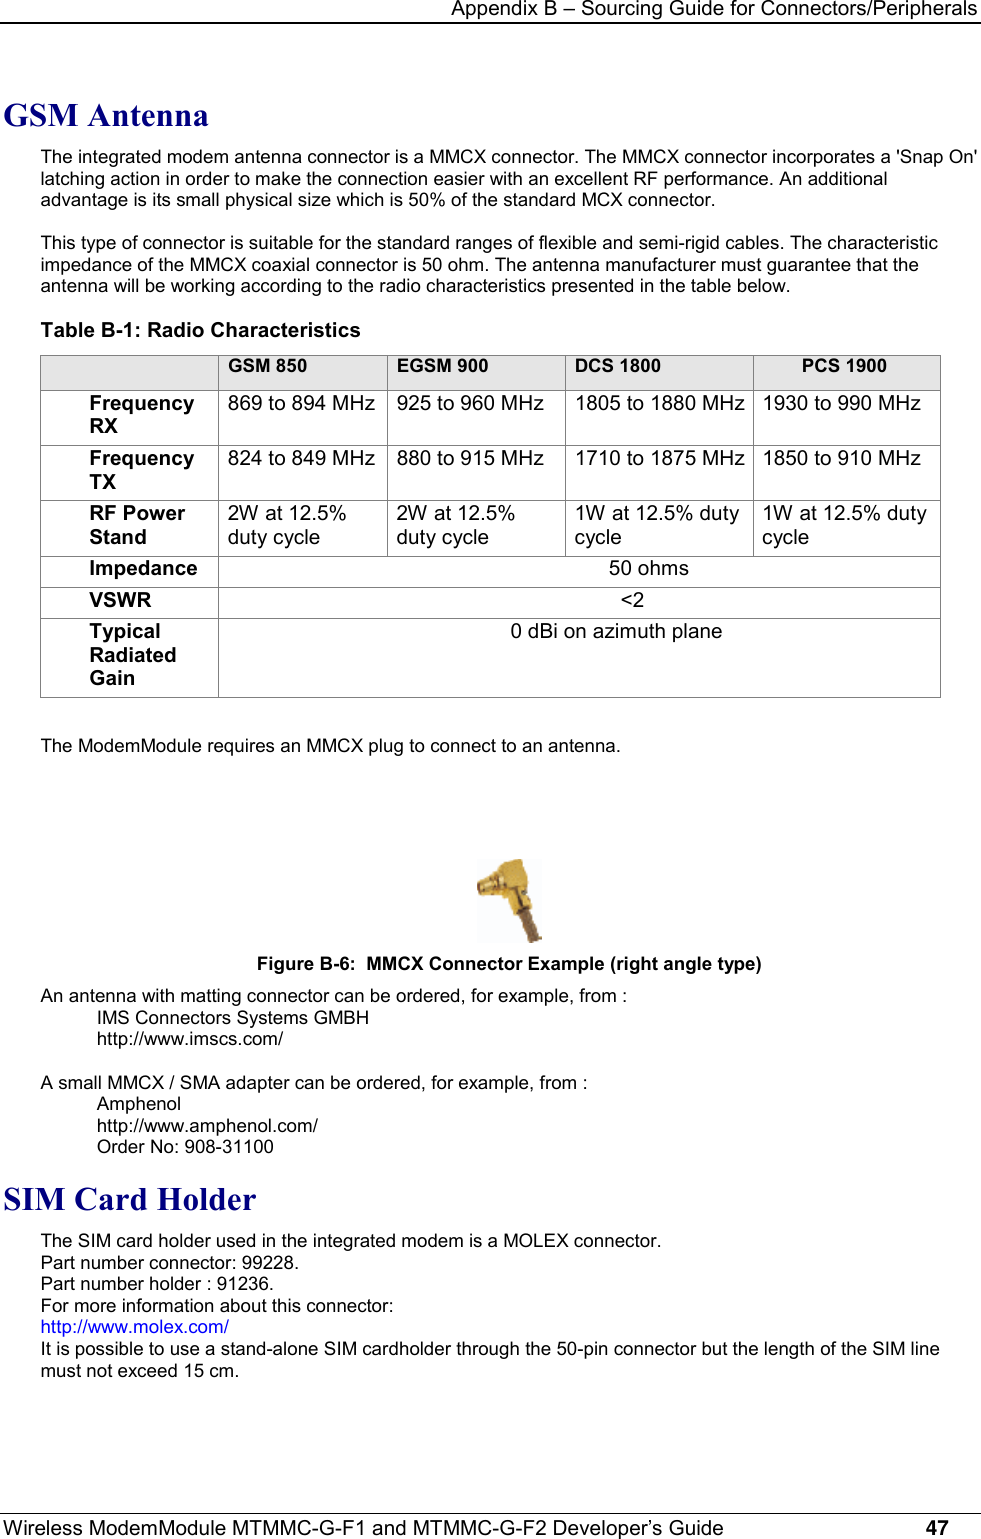 Appendix B – Sourcing Guide for Connectors/PeripheralsWireless ModemModule MTMMC-G-F1 and MTMMC-G-F2 Developer’s Guide     47GSM AntennaThe integrated modem antenna connector is a MMCX connector. The MMCX connector incorporates a &apos;Snap On&apos;latching action in order to make the connection easier with an excellent RF performance. An additionaladvantage is its small physical size which is 50% of the standard MCX connector.This type of connector is suitable for the standard ranges of flexible and semi-rigid cables. The characteristicimpedance of the MMCX coaxial connector is 50 ohm. The antenna manufacturer must guarantee that theantenna will be working according to the radio characteristics presented in the table below.Table B-1: Radio CharacteristicsGSM 850 EGSM 900 DCS 1800 PCS 1900FrequencyRX869 to 894 MHz 925 to 960 MHz 1805 to 1880 MHz 1930 to 990 MHzFrequencyTX824 to 849 MHz 880 to 915 MHz 1710 to 1875 MHz 1850 to 910 MHzRF PowerStand2W at 12.5%duty cycle2W at 12.5%duty cycle1W at 12.5% dutycycle1W at 12.5% dutycycleImpedance                                                            50 ohmsVSWR                                                              &lt;2TypicalRadiatedGain                                          0 dBi on azimuth planeThe ModemModule requires an MMCX plug to connect to an antenna.Figure B-6:  MMCX Connector Example (right angle type)An antenna with matting connector can be ordered, for example, from :IMS Connectors Systems GMBHhttp://www.imscs.com/A small MMCX / SMA adapter can be ordered, for example, from :Amphenolhttp://www.amphenol.com/Order No: 908-31100SIM Card HolderThe SIM card holder used in the integrated modem is a MOLEX connector.Part number connector: 99228.Part number holder : 91236.For more information about this connector:http://www.molex.com/It is possible to use a stand-alone SIM cardholder through the 50-pin connector but the length of the SIM linemust not exceed 15 cm.